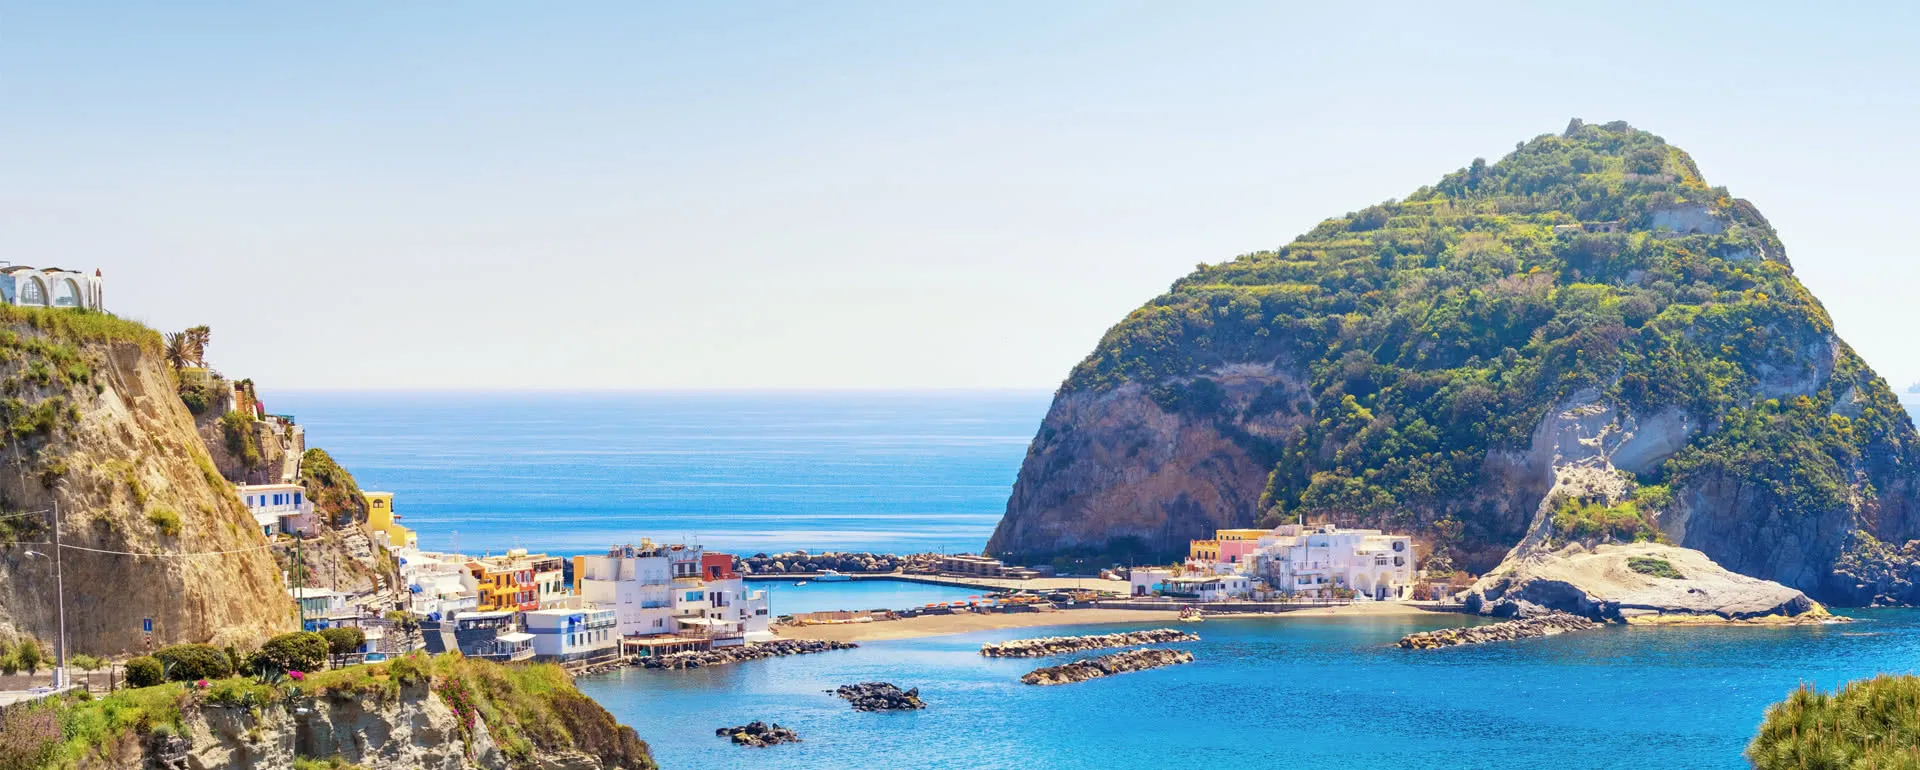 Ischia - the destination for groups